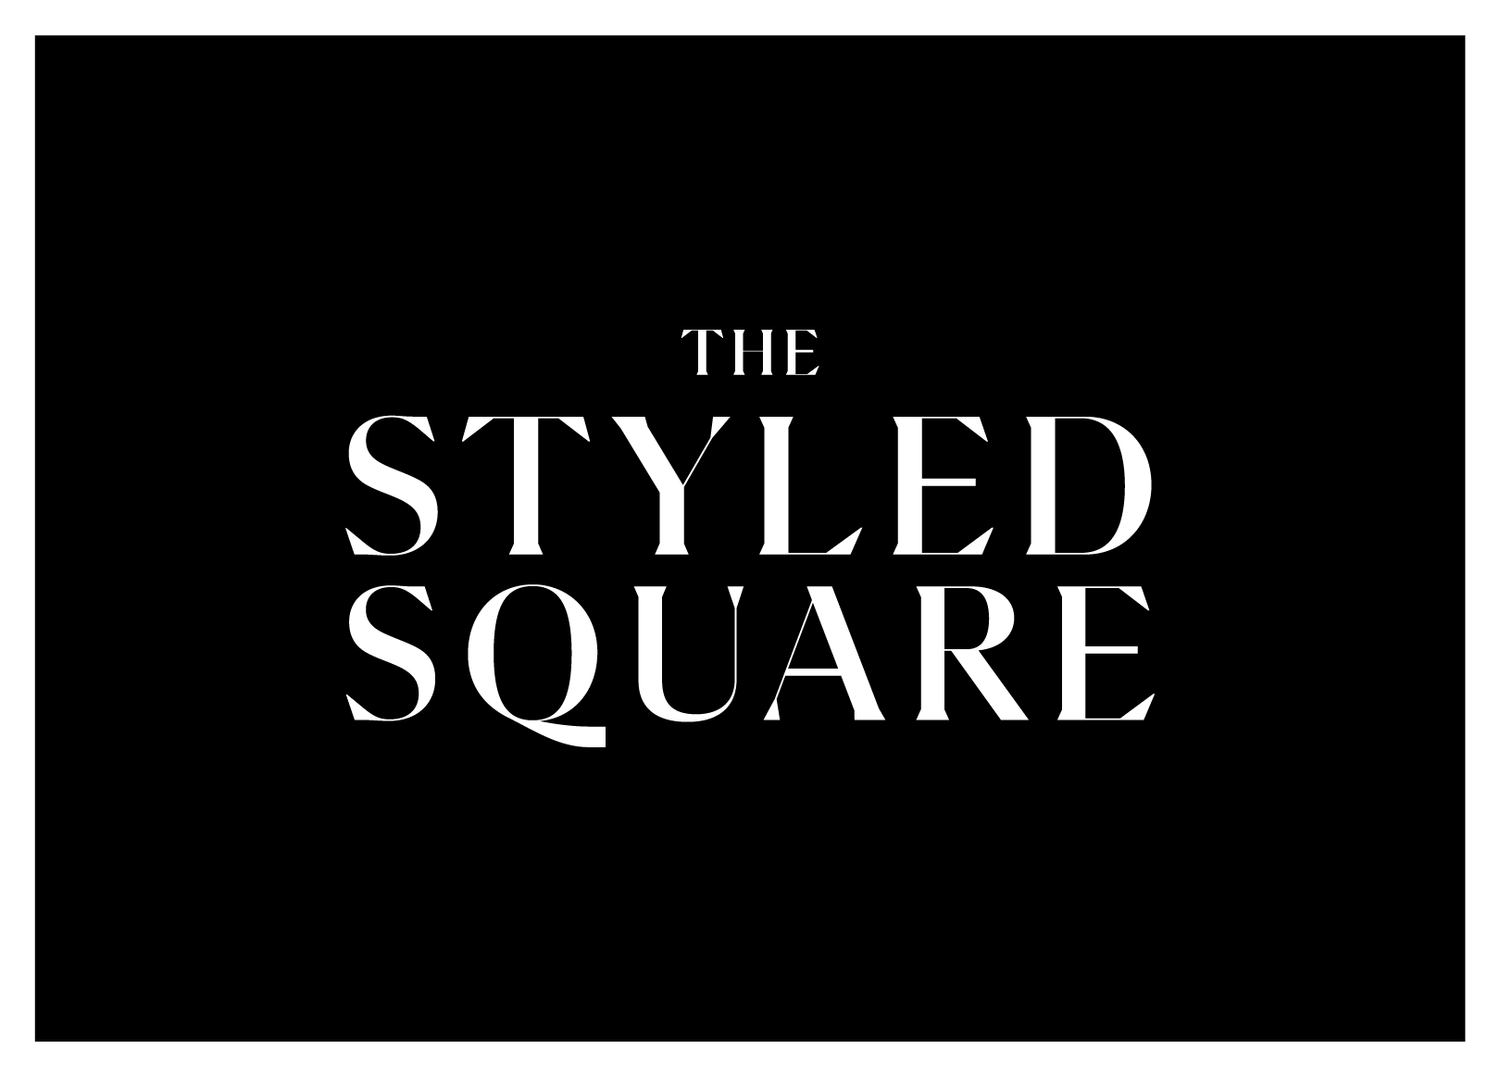 The Styled Square